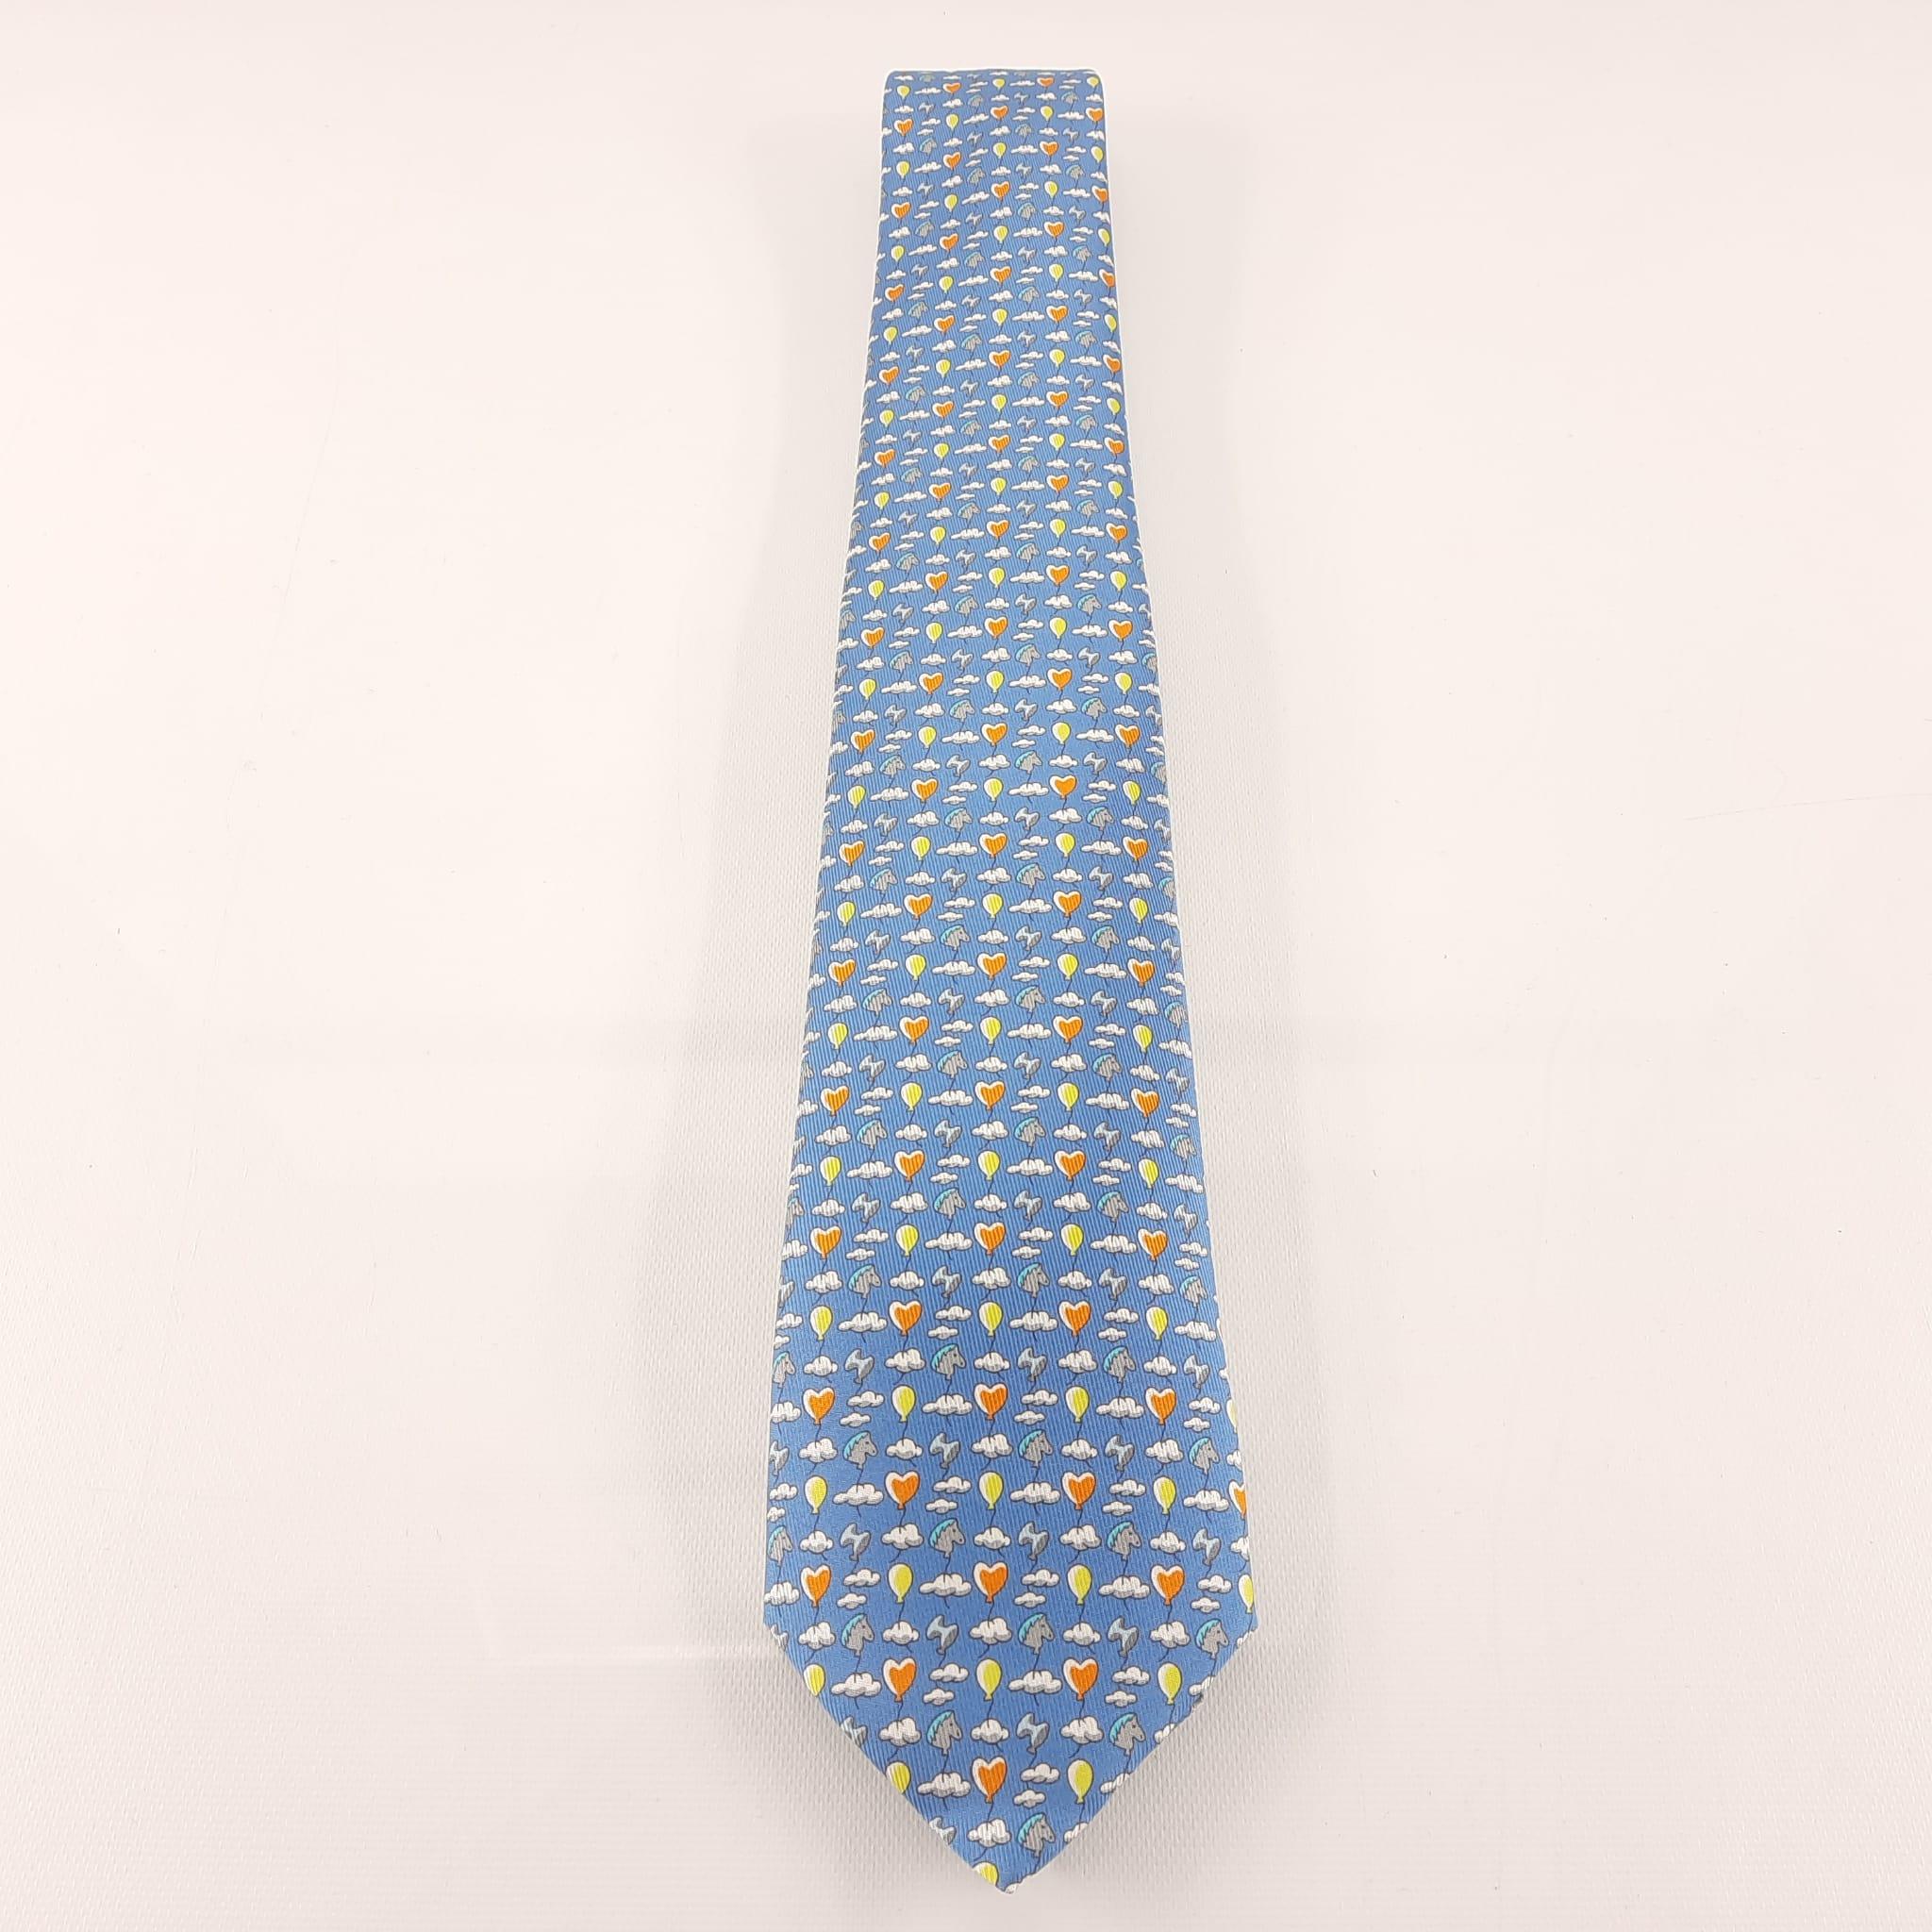 Hermes Bleu Clair / Gris / Orange Up In The Clouds tie In New Condition For Sale In Nicosia, CY